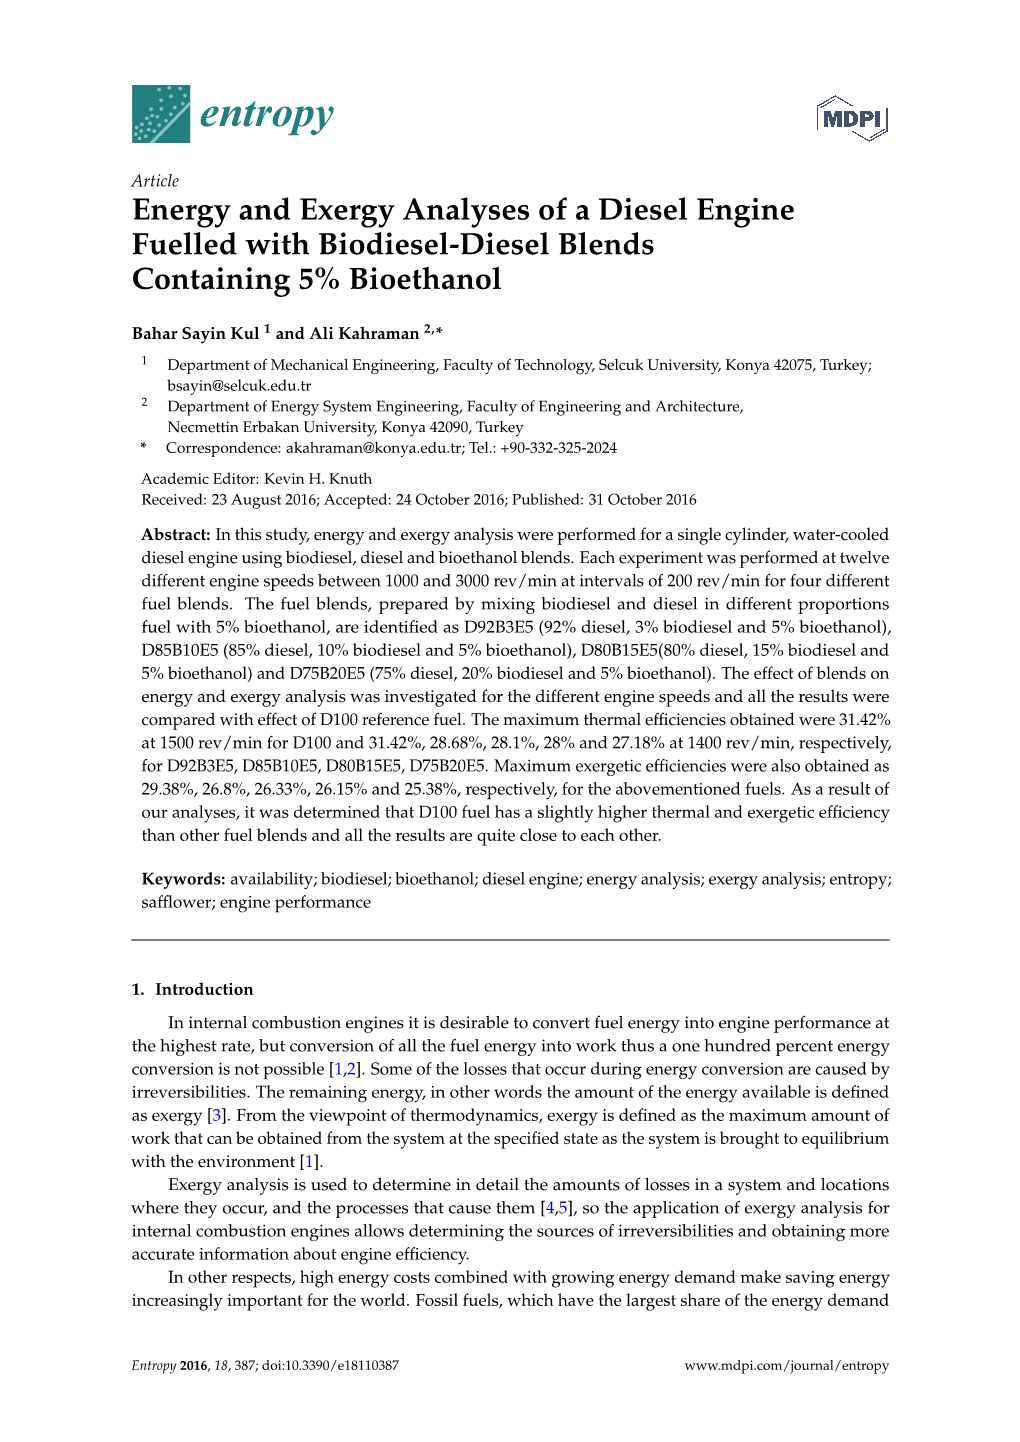 Energy and Exergy Analyses of a Diesel Engine Fuelled with Biodiesel-Diesel Blends Containing 5% Bioethanol